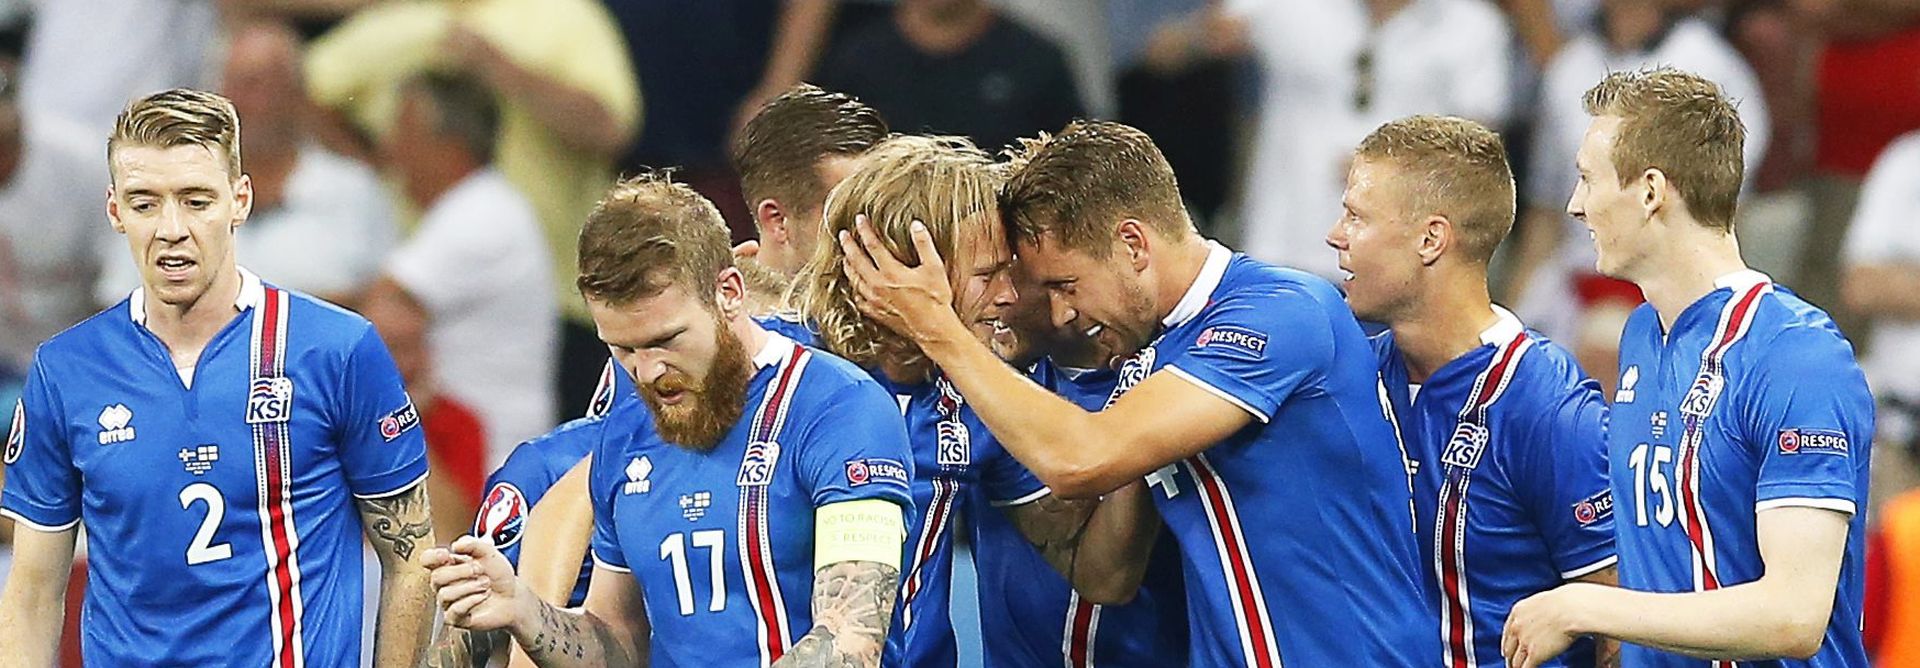 epa05395183 Players of Iceland celebrate their 2-1 lead during the UEFA EURO 2016 round of 16 match between England and Iceland at Stade de Nice in Nice, France, 27 June 2016.

(RESTRICTIONS APPLY: For editorial news reporting purposes only. Not used for commercial or marketing purposes without prior written approval of UEFA. Images must appear as still images and must not emulate match action video footage. Photographs published in online publications (whether via the Internet or otherwise) shall have an interval of at least 20 seconds between the posting.)  EPA/SEBASTIEN NOGIER   EDITORIAL USE ONLY